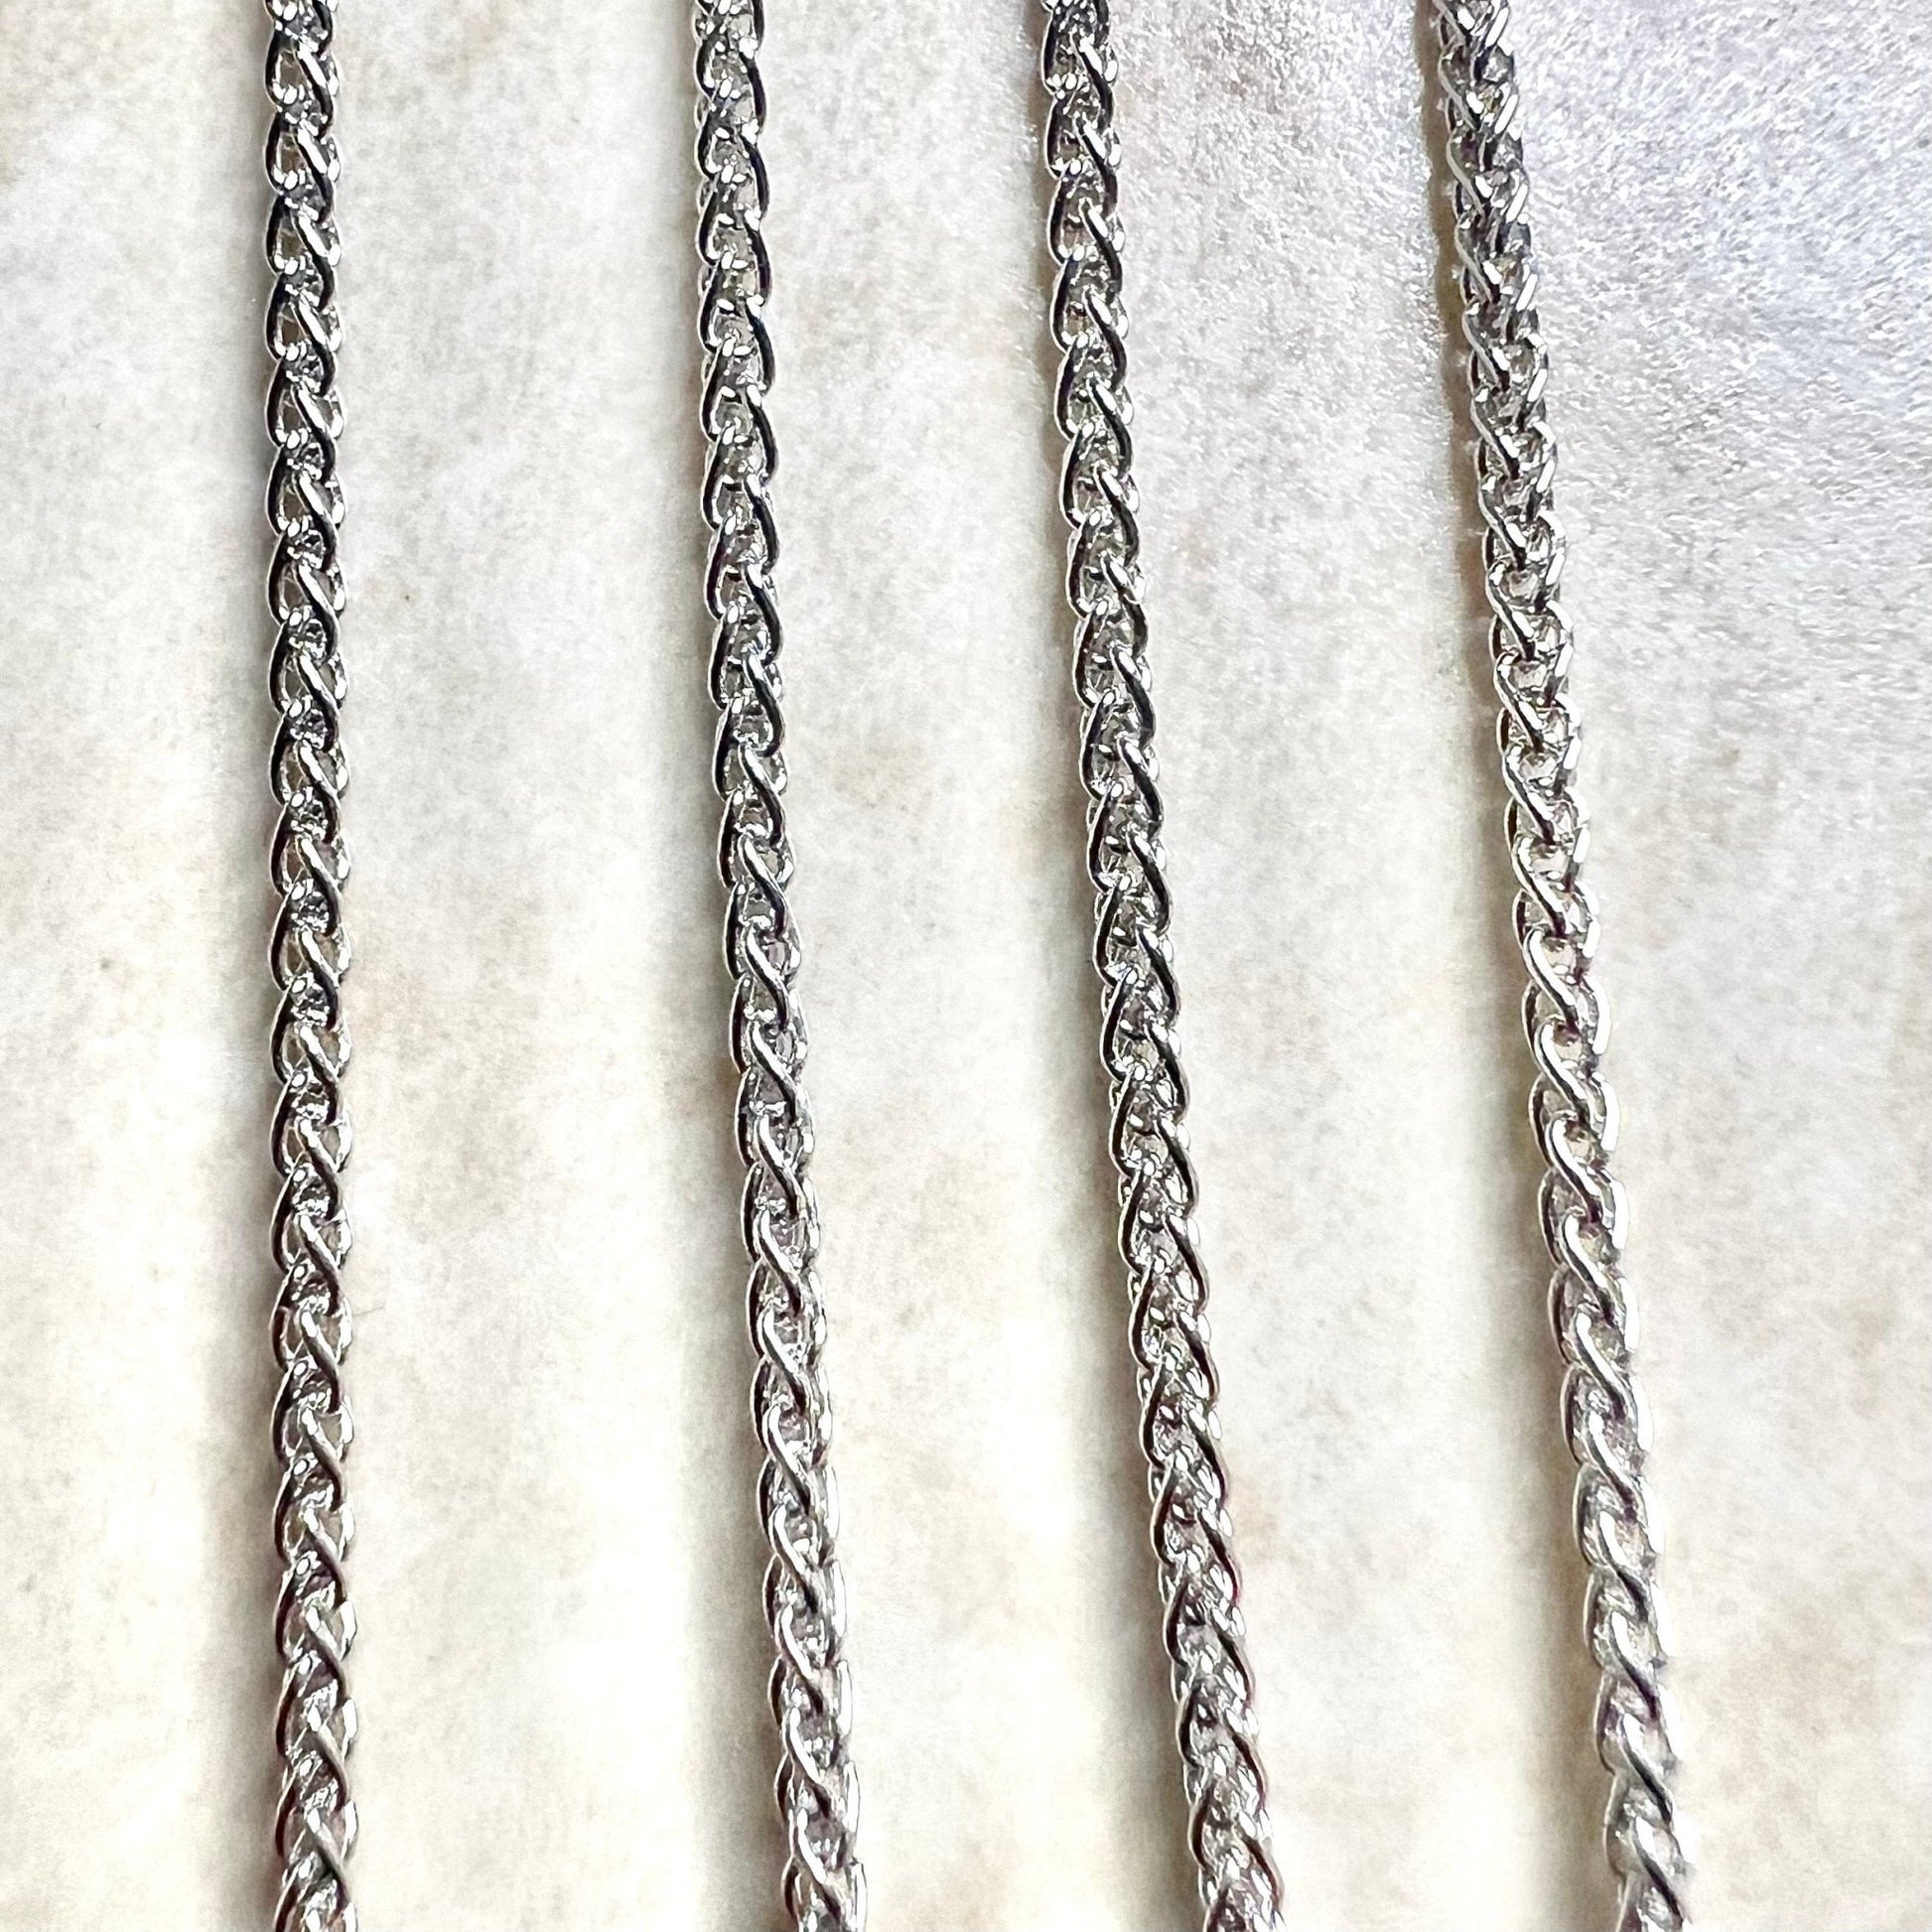 Italian 14K White Gold Wheat Chain Necklace - 18 Inch Gold Chain Necklace - 14K White Gold Necklace - 14K Solid Gold Chain - Gift For Her